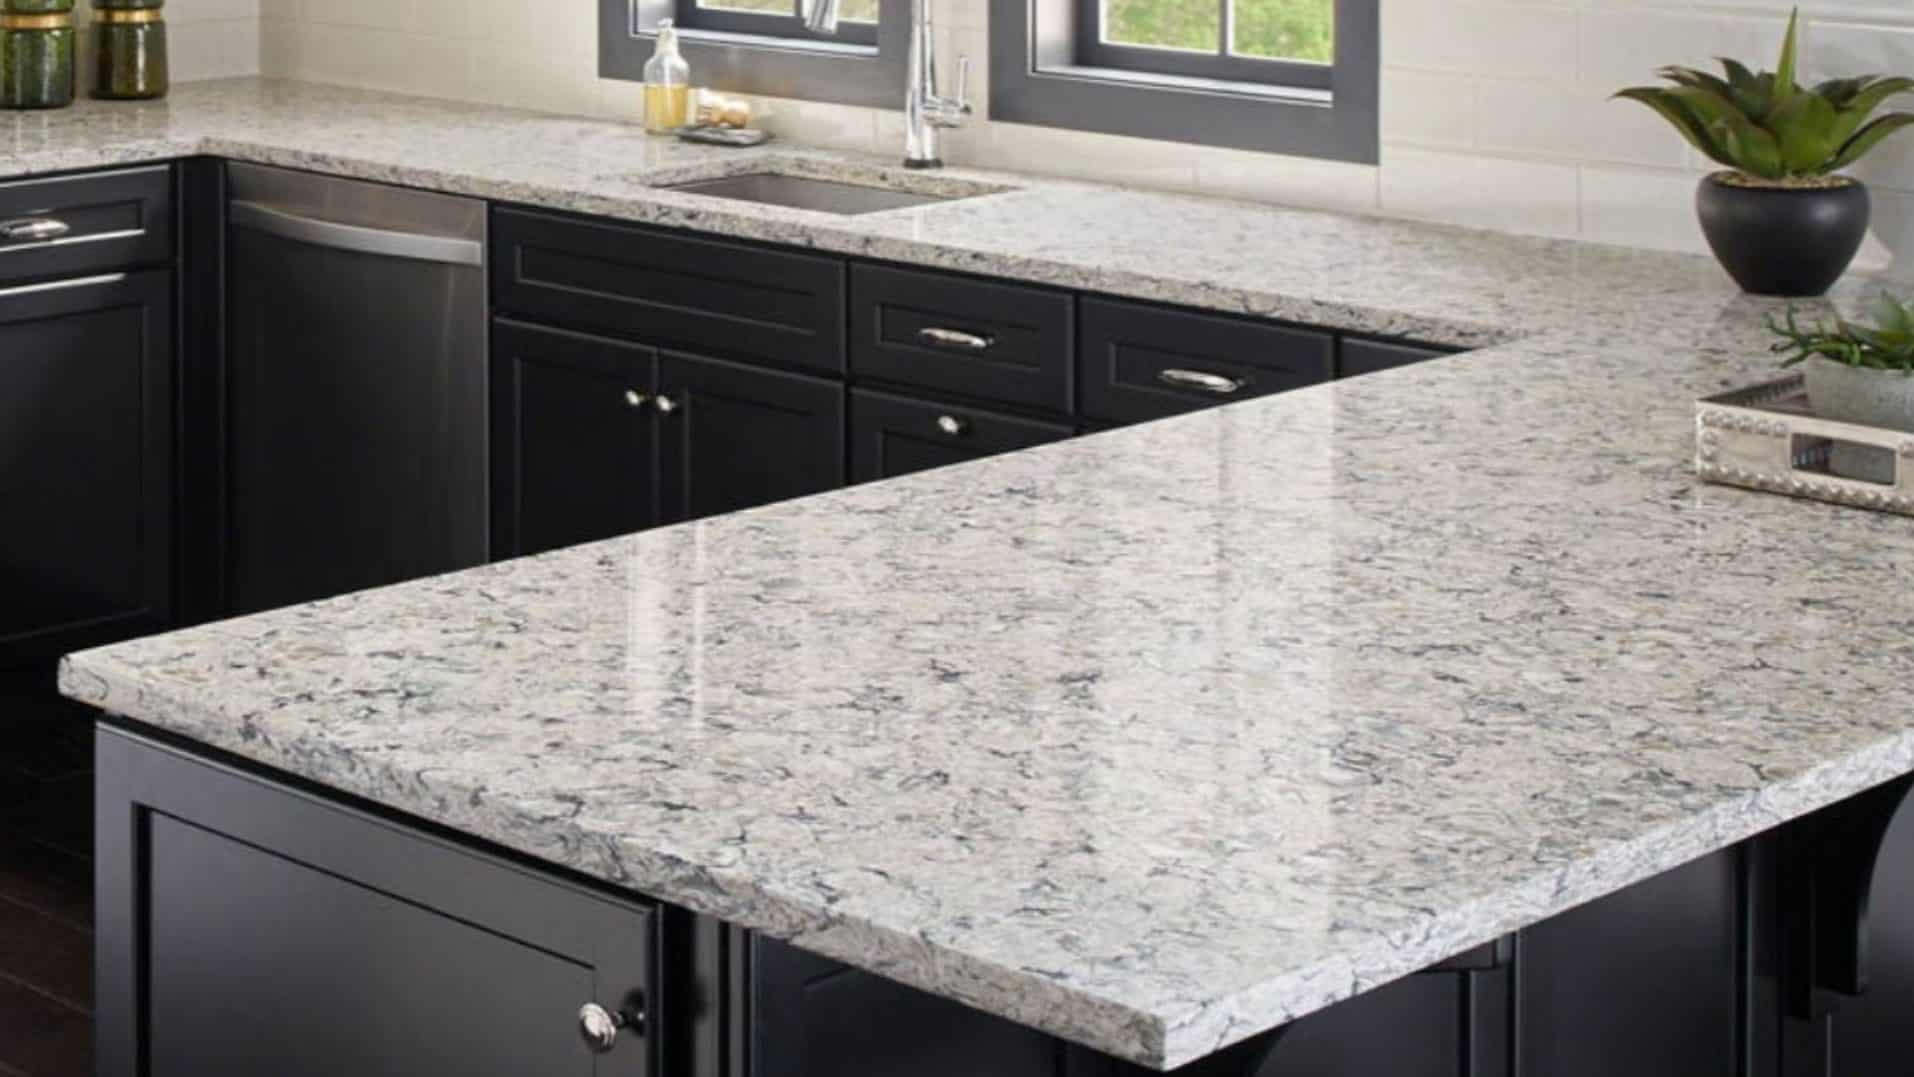 Pros and Cons of Different Counter Tops